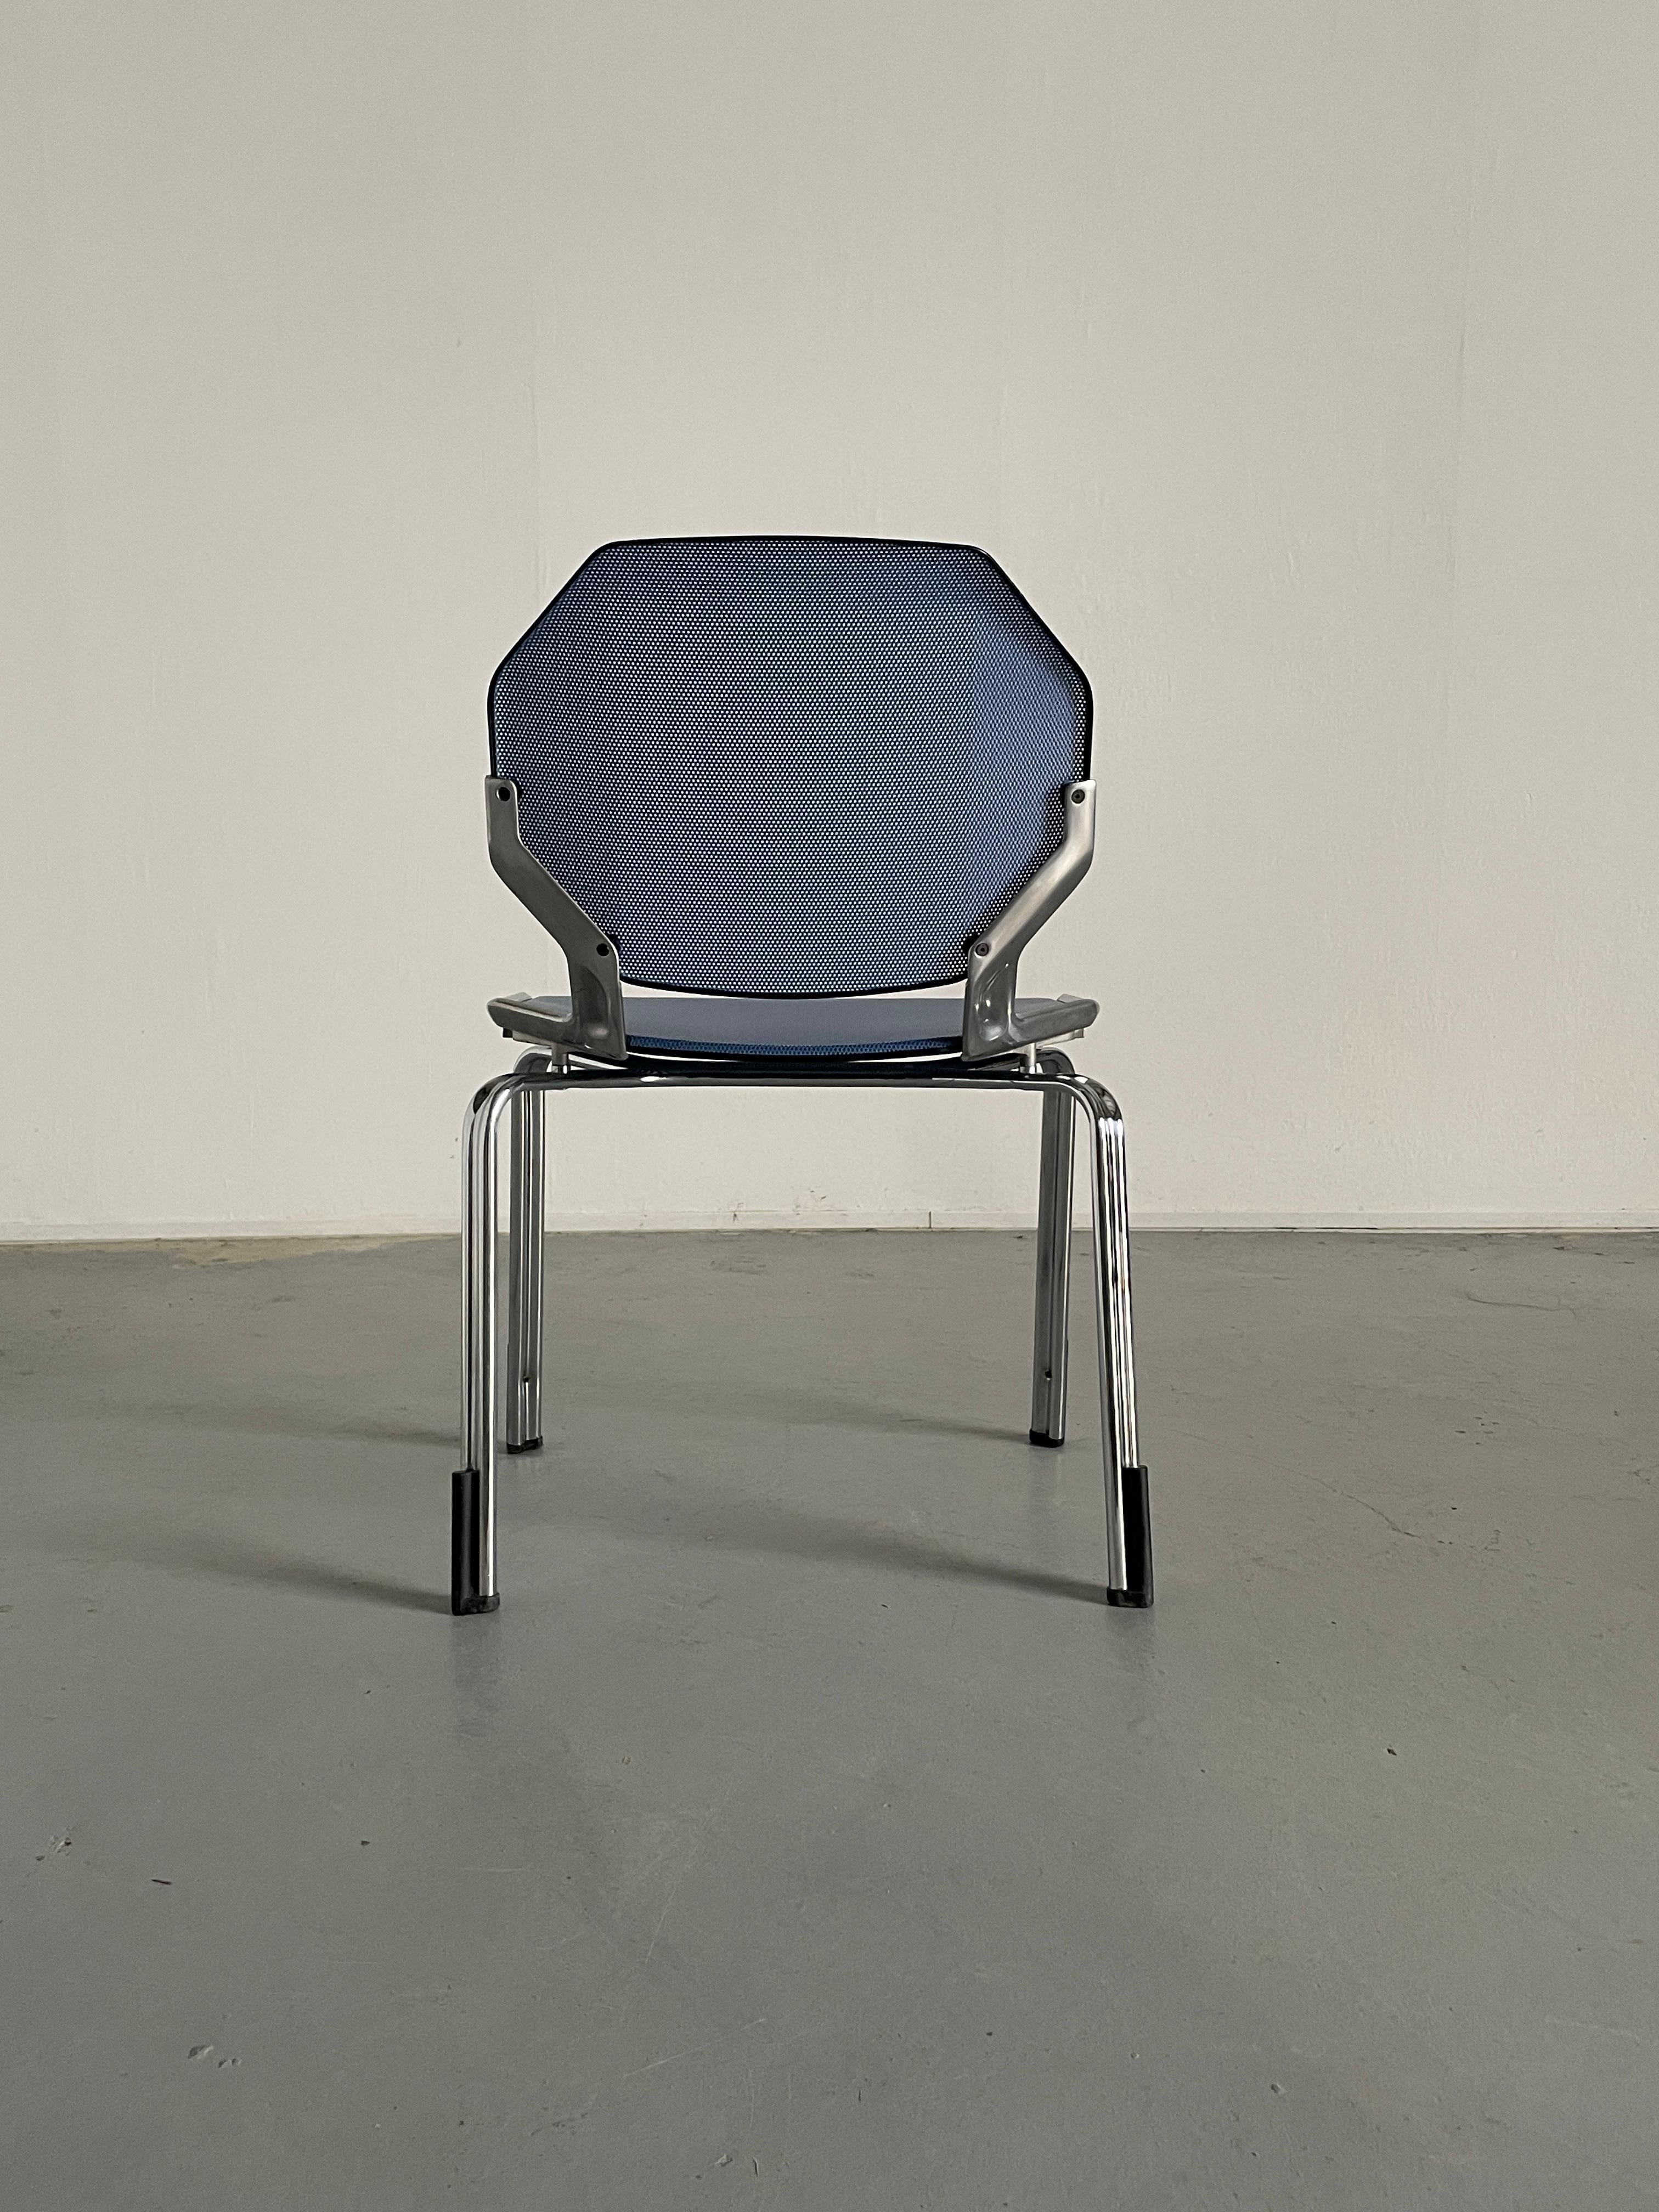 Space Age Futuristic Octagonal Stackable Dining Chairs by Fröscher Sitform, 90s In Good Condition For Sale In Zagreb, HR